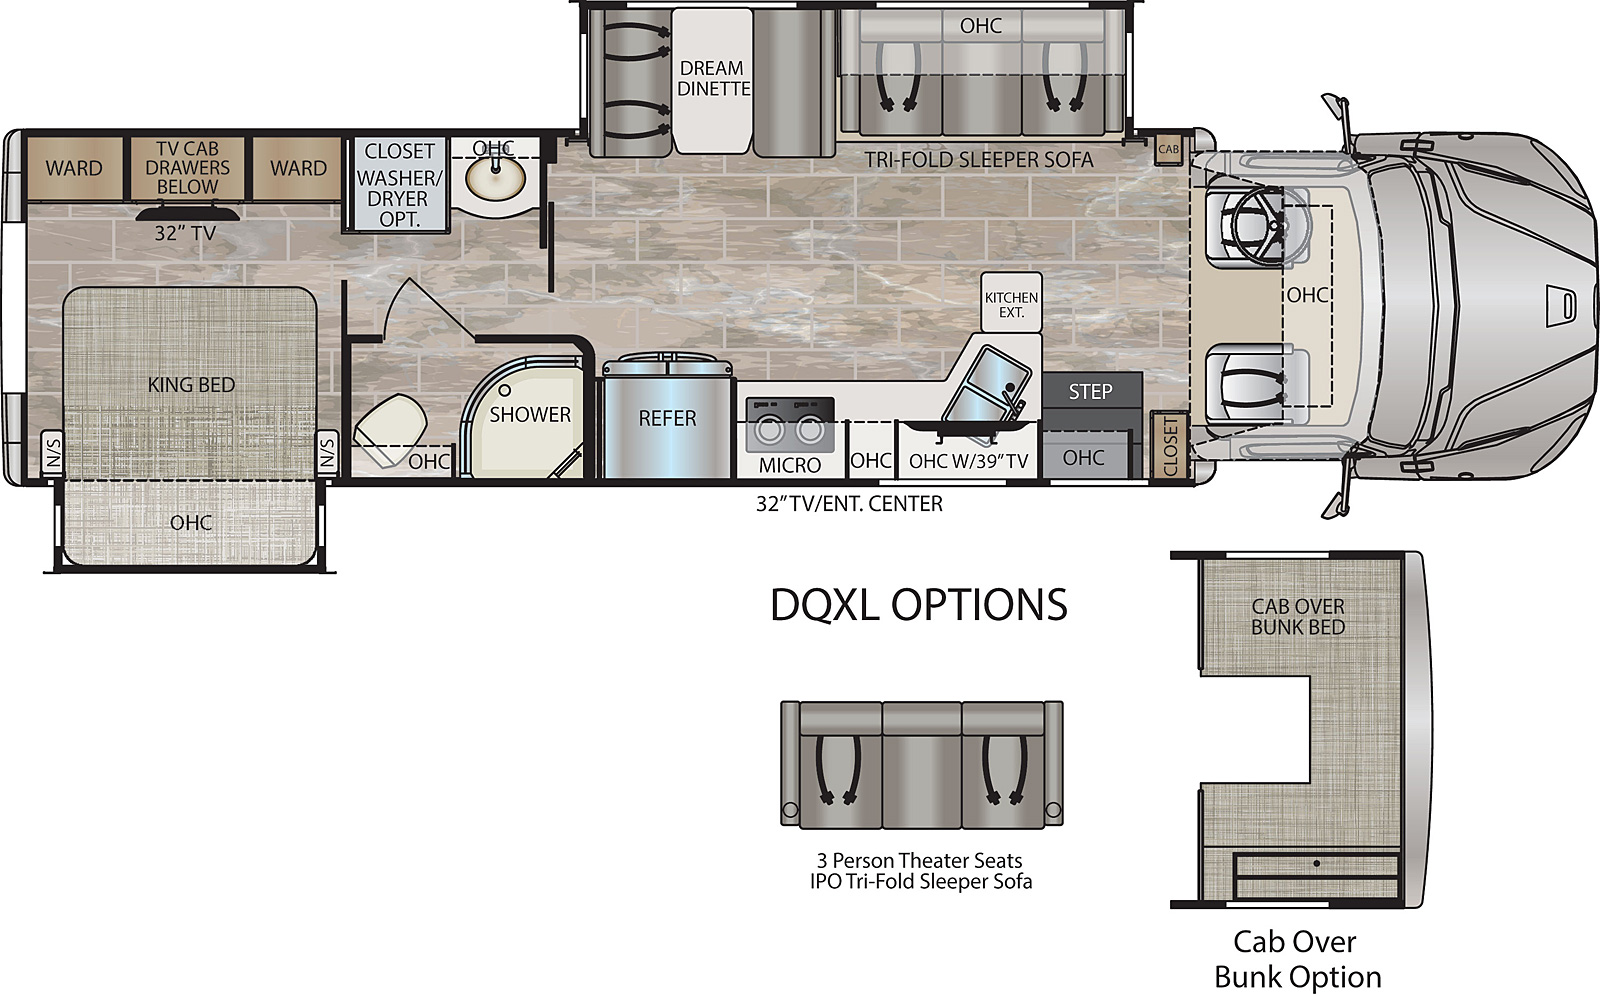 The 3400BD has 2 slide outs; 1 off-door side, 1 door side. Entry door, TV door side exterior.  Interior layout from front to back:  cab overhead cabinet, door side slide out;  sofa sleeper, overhead cabinet, dream dinette, off-door side; bath sink, closet washer dryer option, wardrobe, tv cabinet drawers below, door side; closet overhead cabinet, kitchen with double basin sink, cook top stove, microwave, refrigerator, bath, door side slide out; king bed, overhead cabinet, option; 3 person theater seats or hide-a-bed sofa in place of L sofa, cab over bunk.